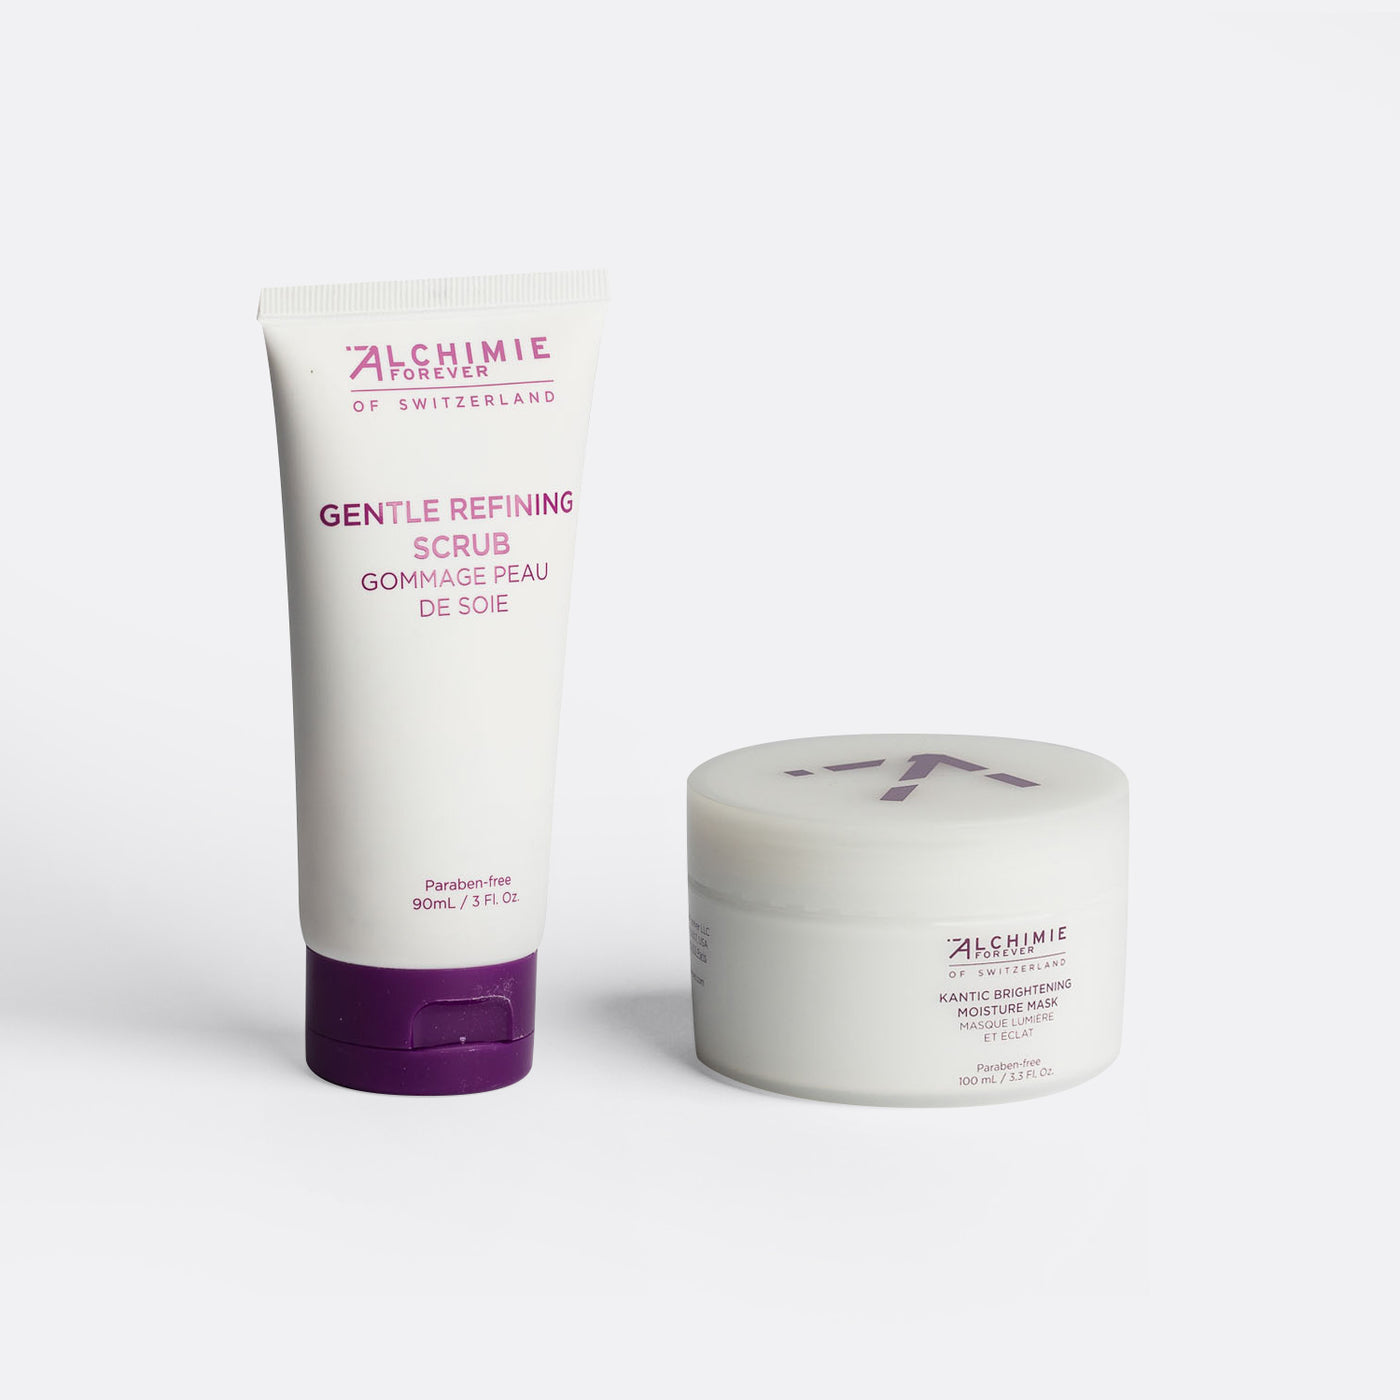 At-Home Facial Bundle with Gentle Refining Scrub and Brightening Moisture Mask